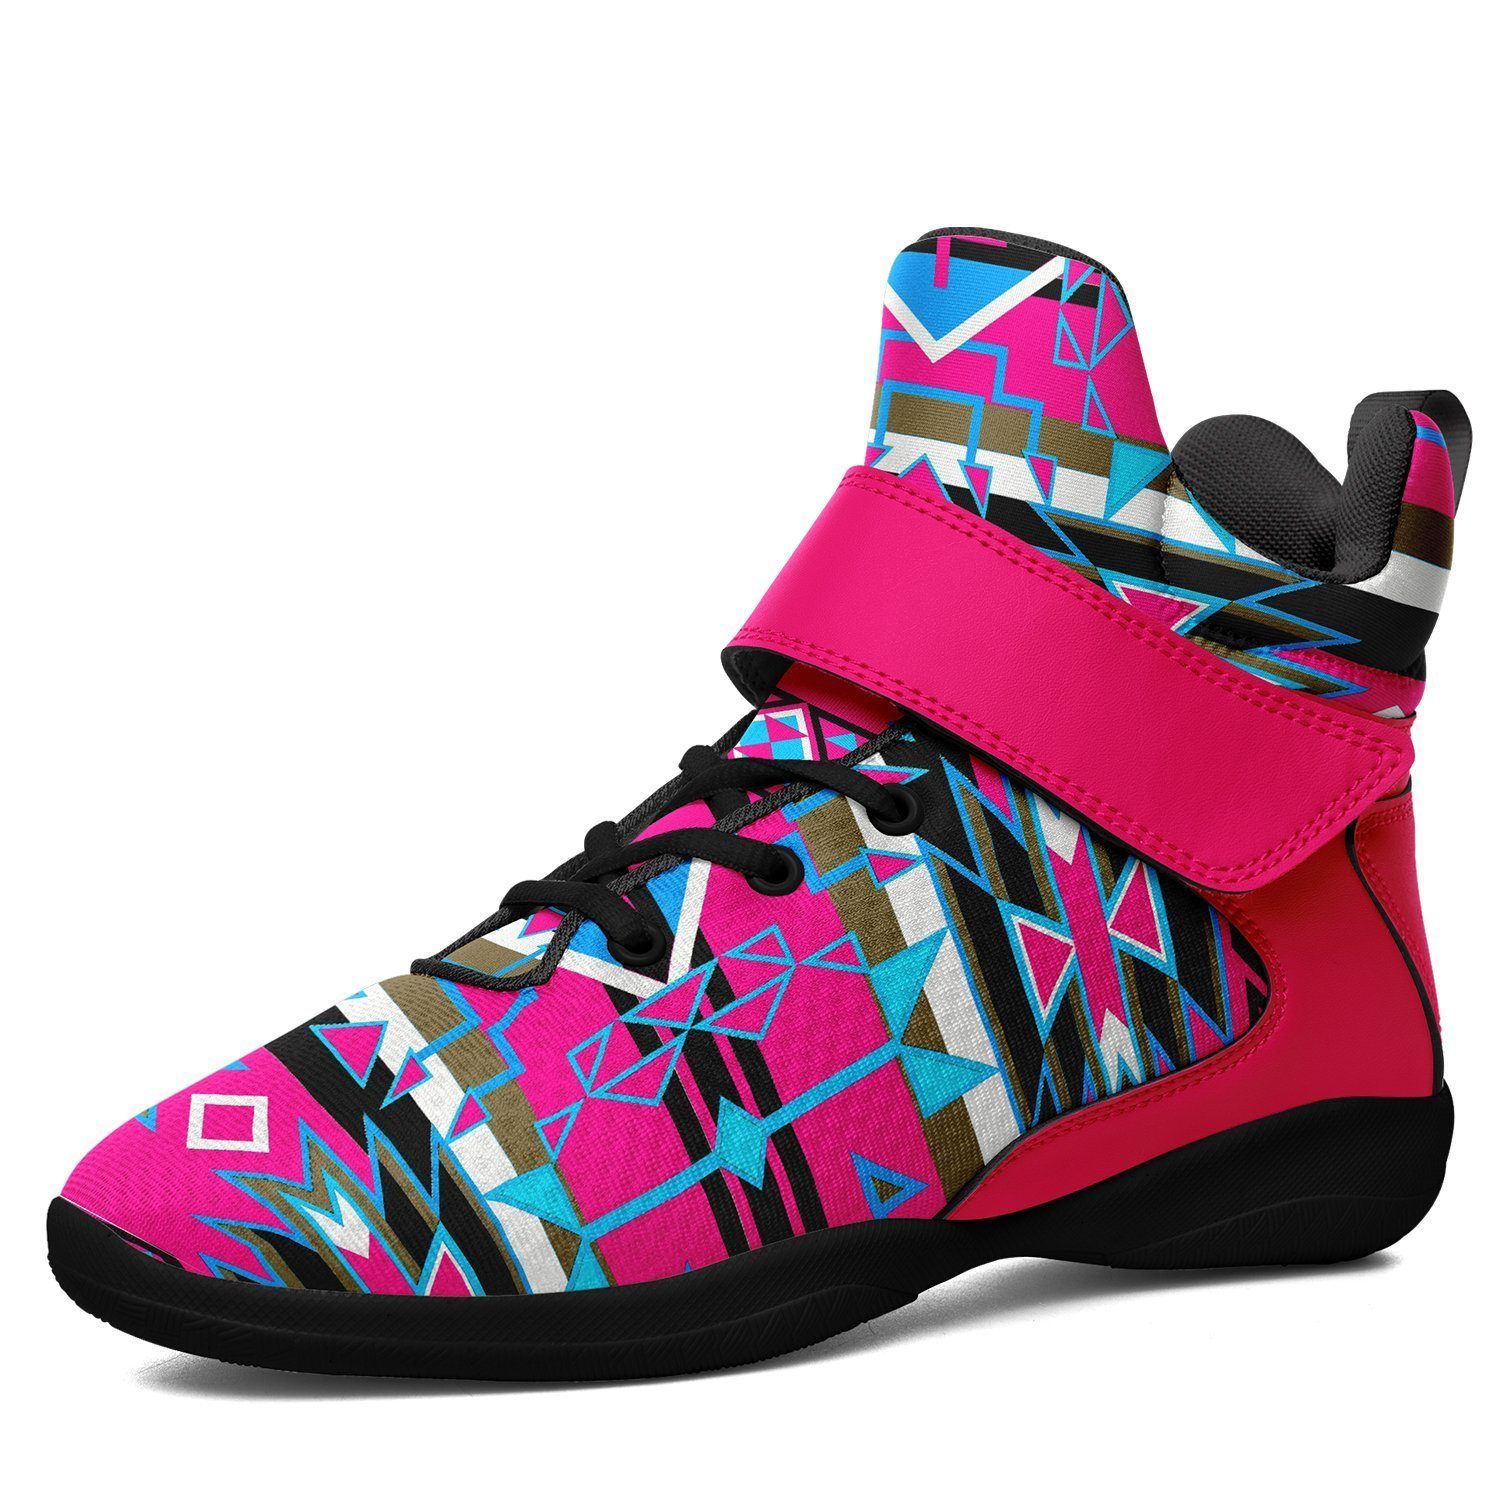 Force of Nature Sunset Storm Kid's Ipottaa Basketball / Sport High Top Shoes 49 Dzine US Child 12.5 / EUR 30 Black Sole with Pink Strap 